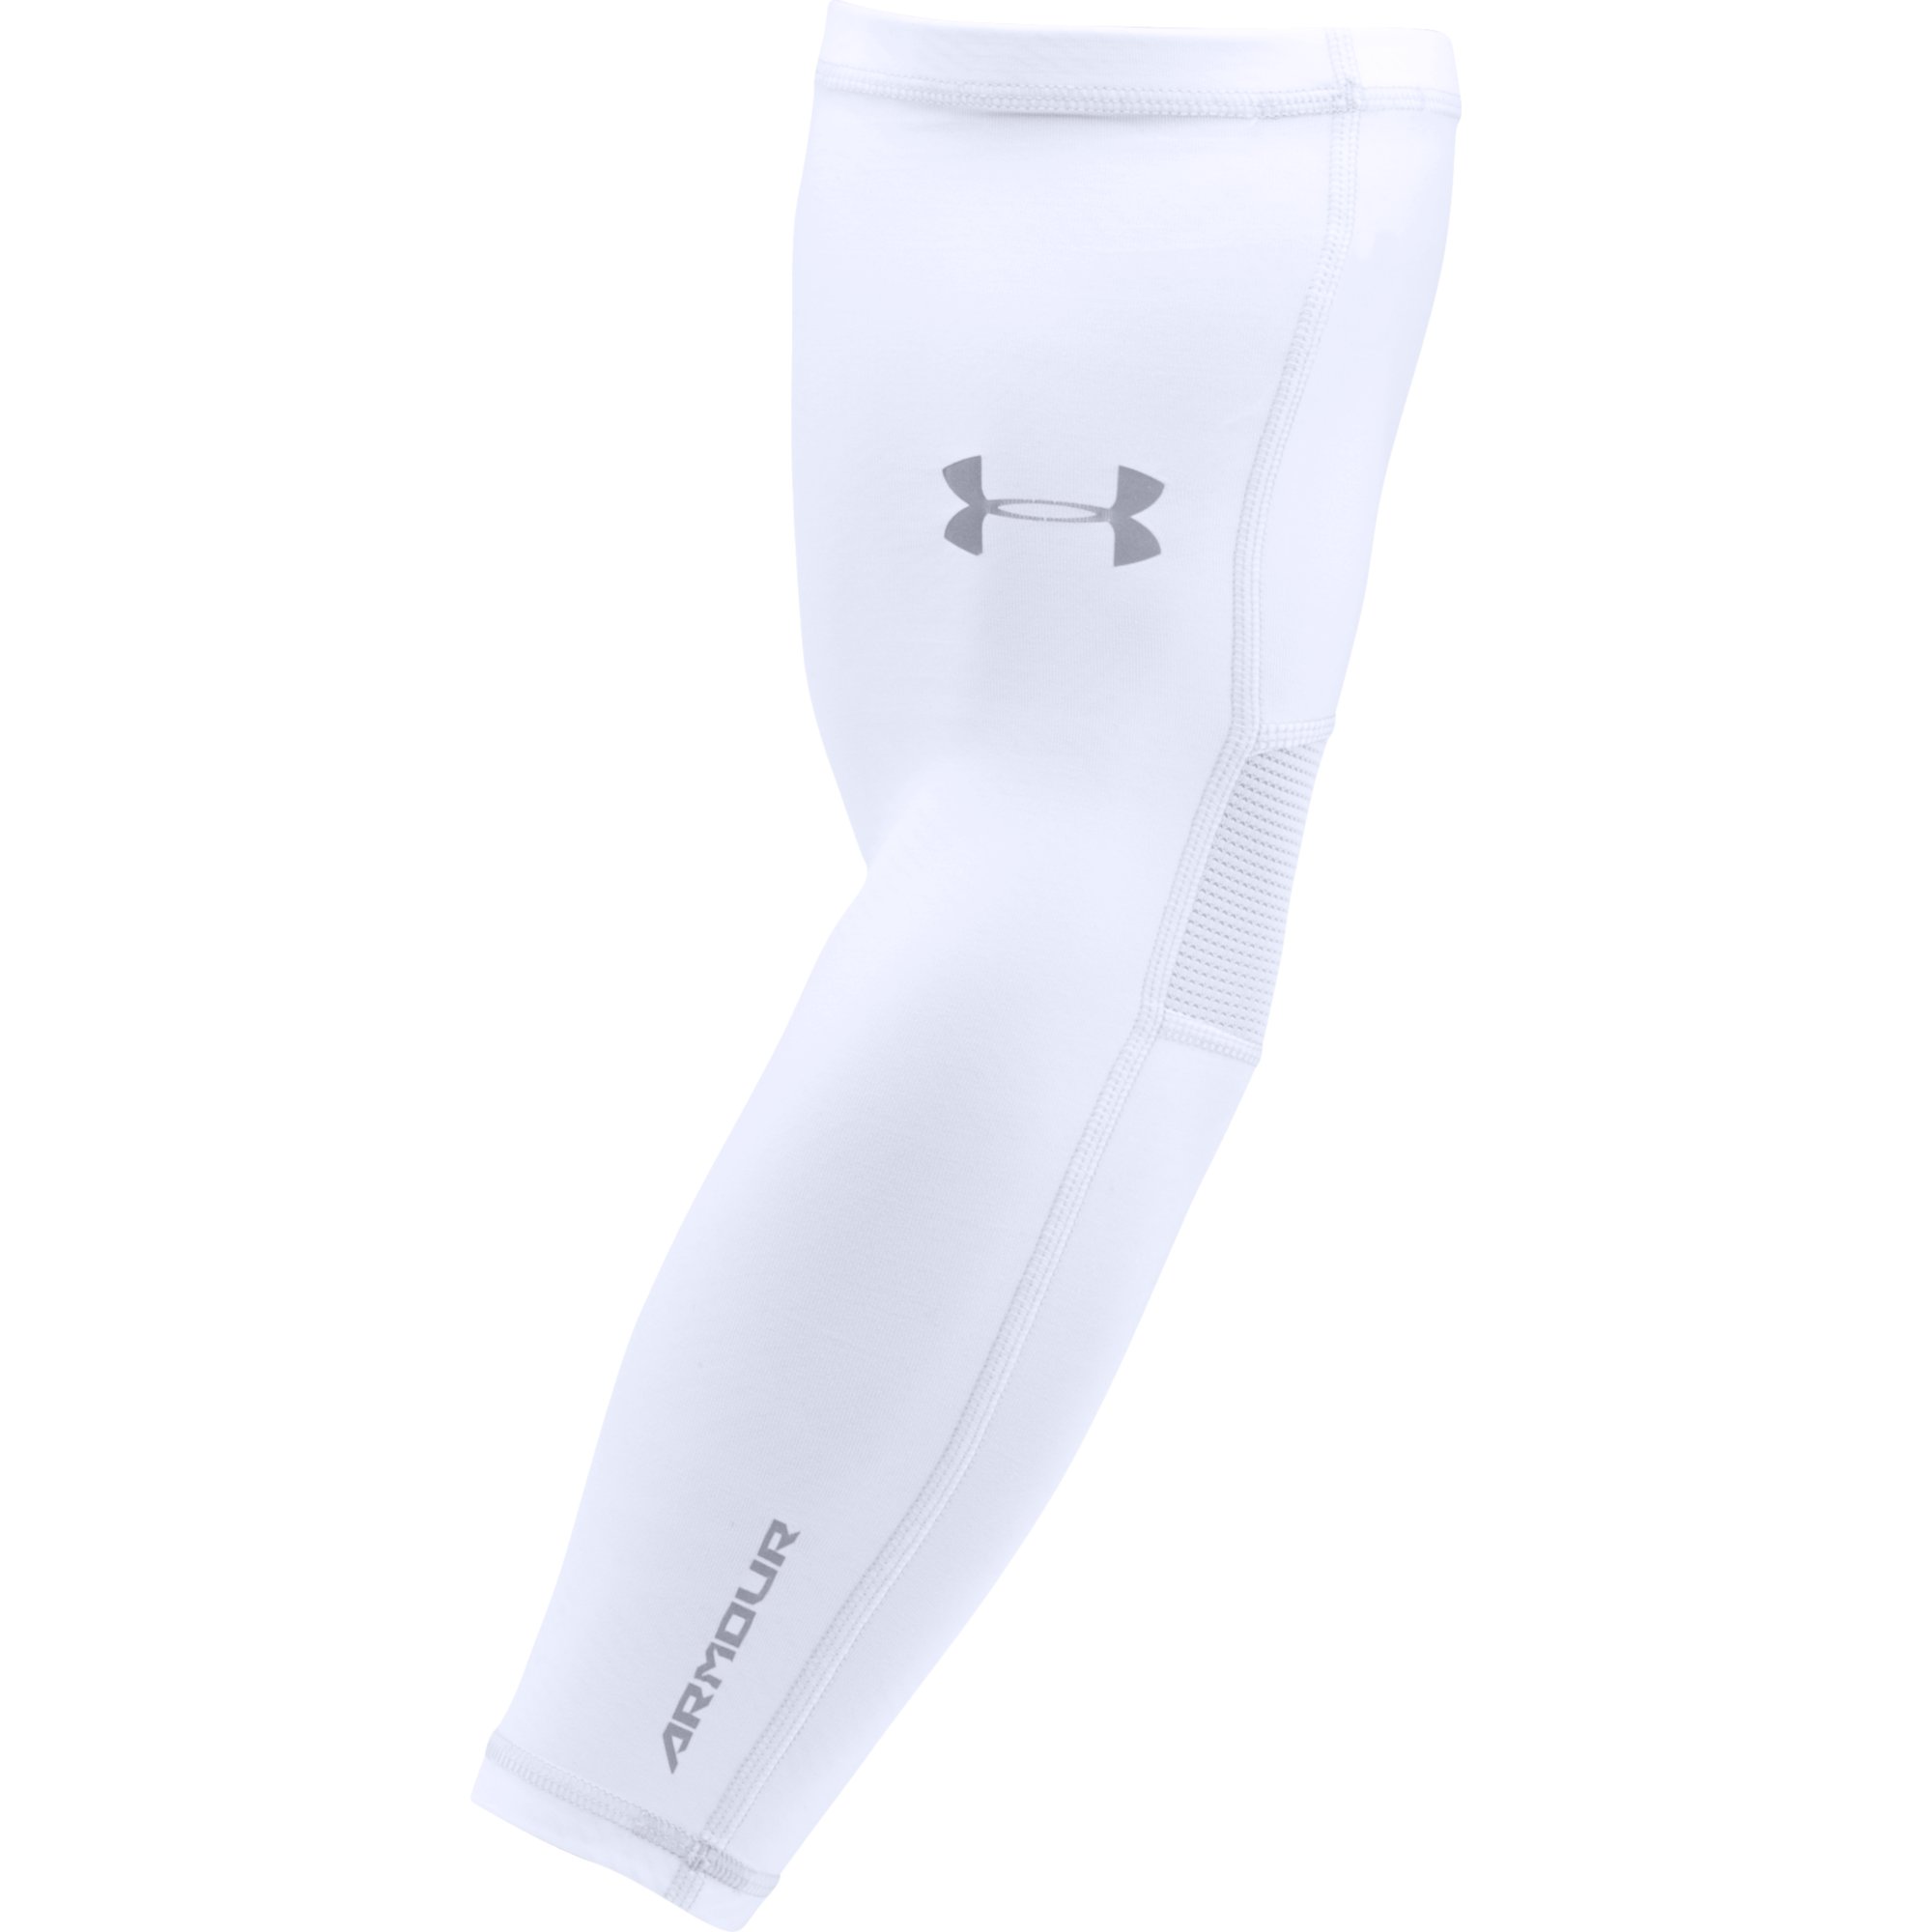 Under Armour Coolswitch Arm Sleeves PGA TOUR